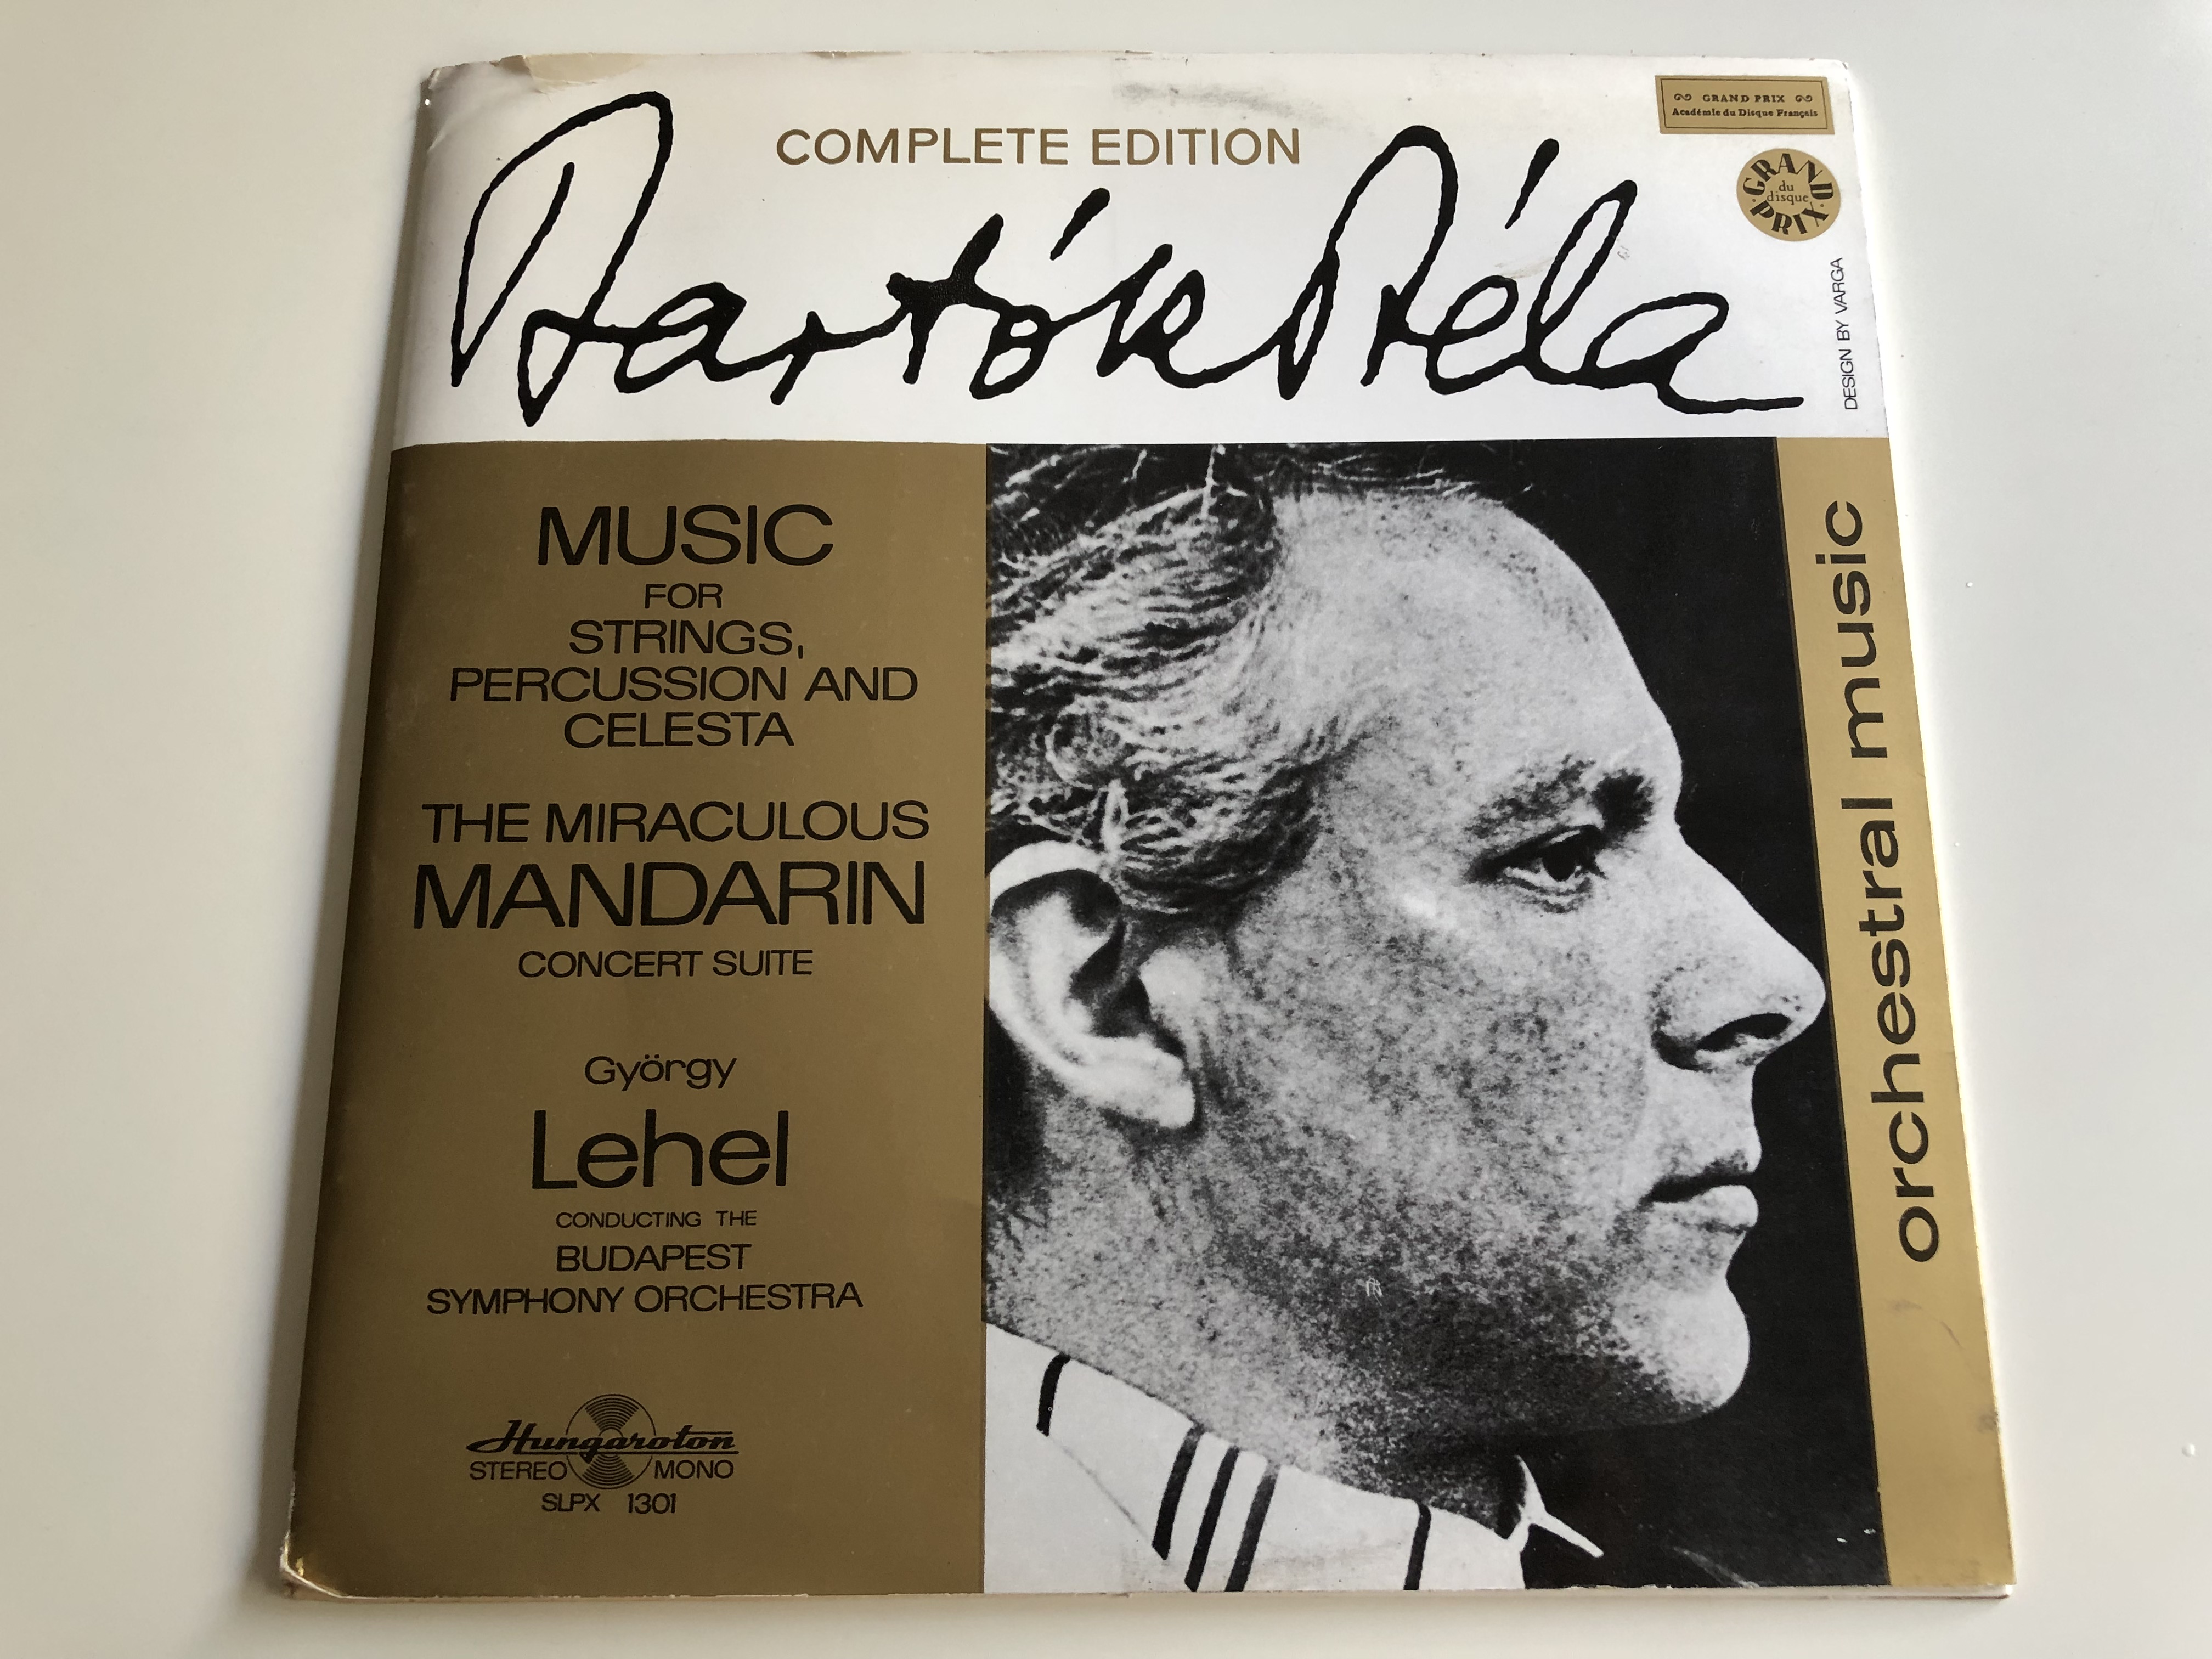 bart-k-b-la-complete-edition-music-for-strings-percussion-and-celesta-the-miraculous-mandarin-concert-suite-gy-rgy-lehel-conducting-the-budapest-symphony-orchestra-hungaroton-slpx-1301-stereo-mono-1-.jpg